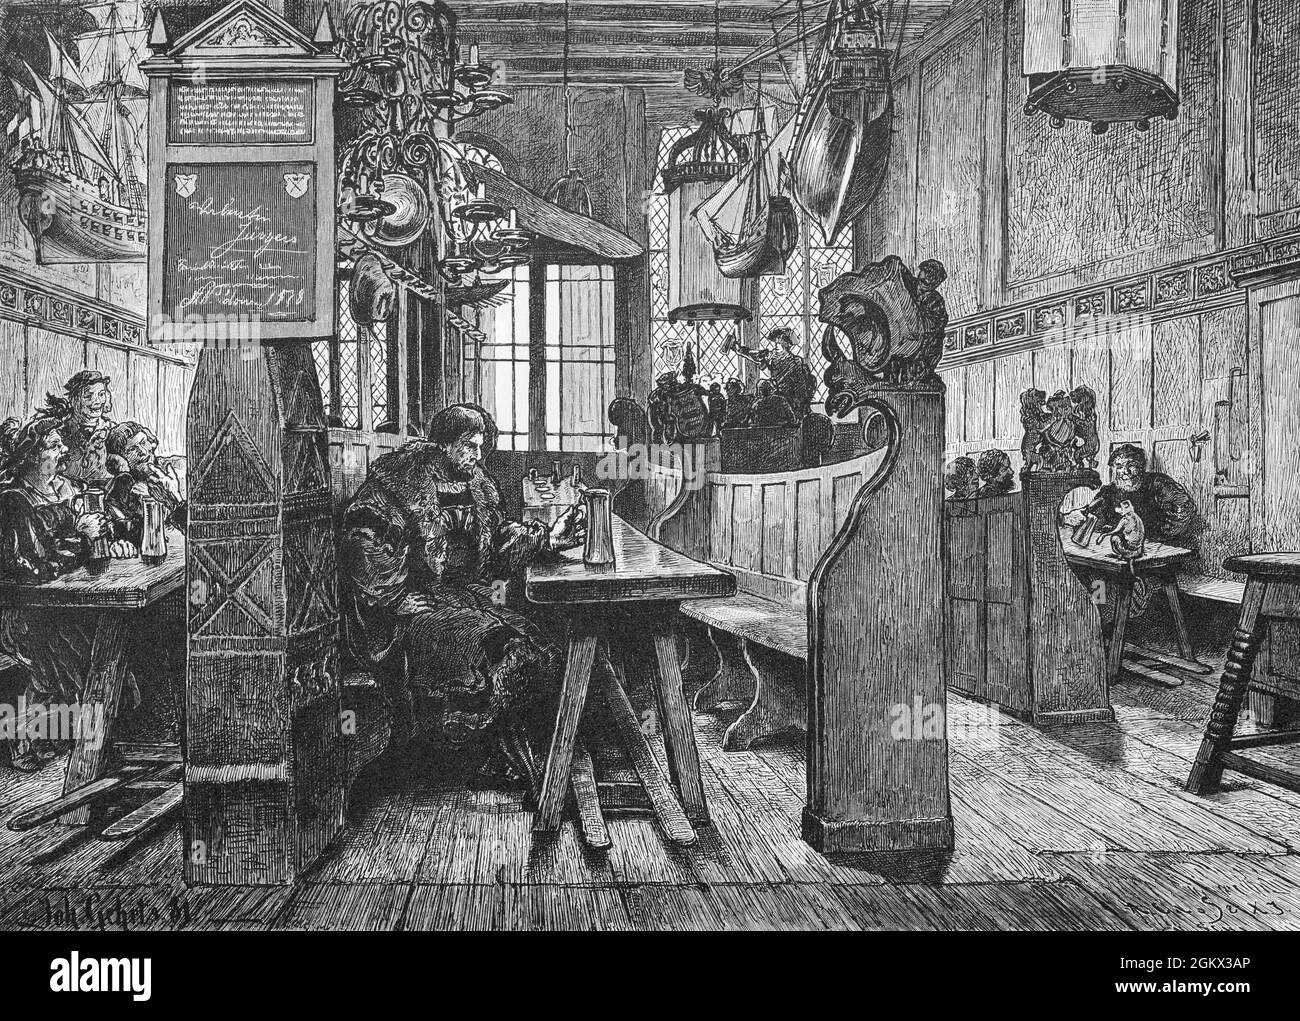 People inside the Schifferhaus or Schiffergesellschaft in the Hanseatic city of Lübeck on the Baltic, Schleswig-Holstein, North Germany, illustration Stock Photo